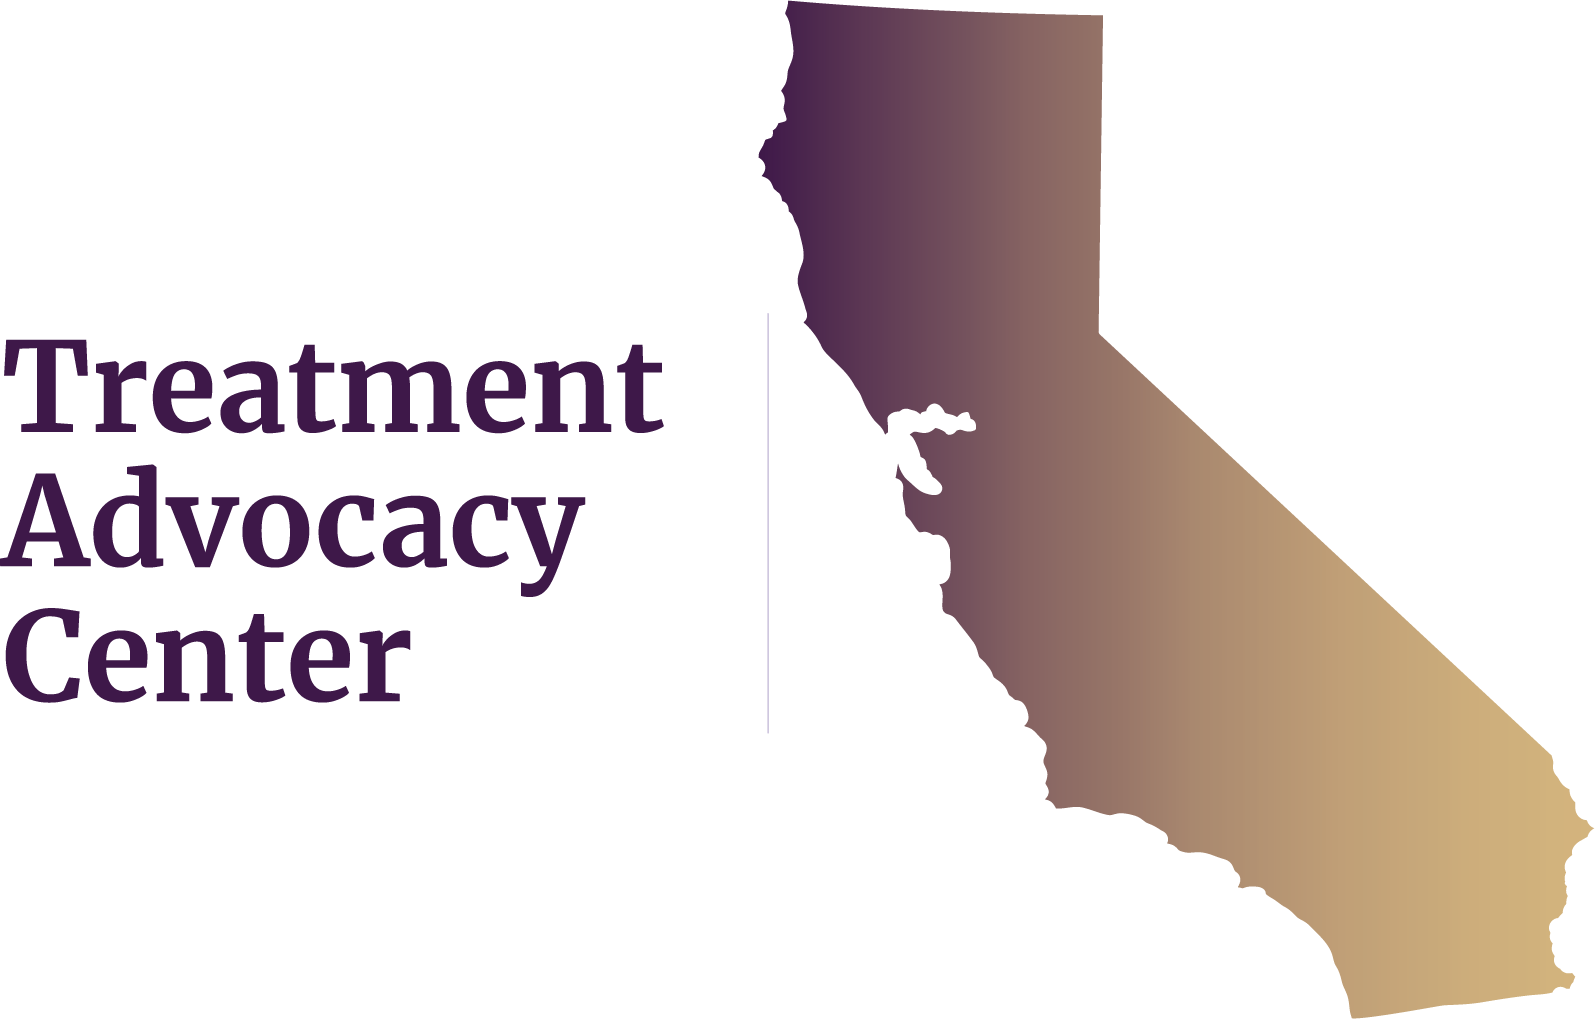 State of California next to Treatment Advocacy Center text, symbolizing local severe mental illness data, laws, and resources